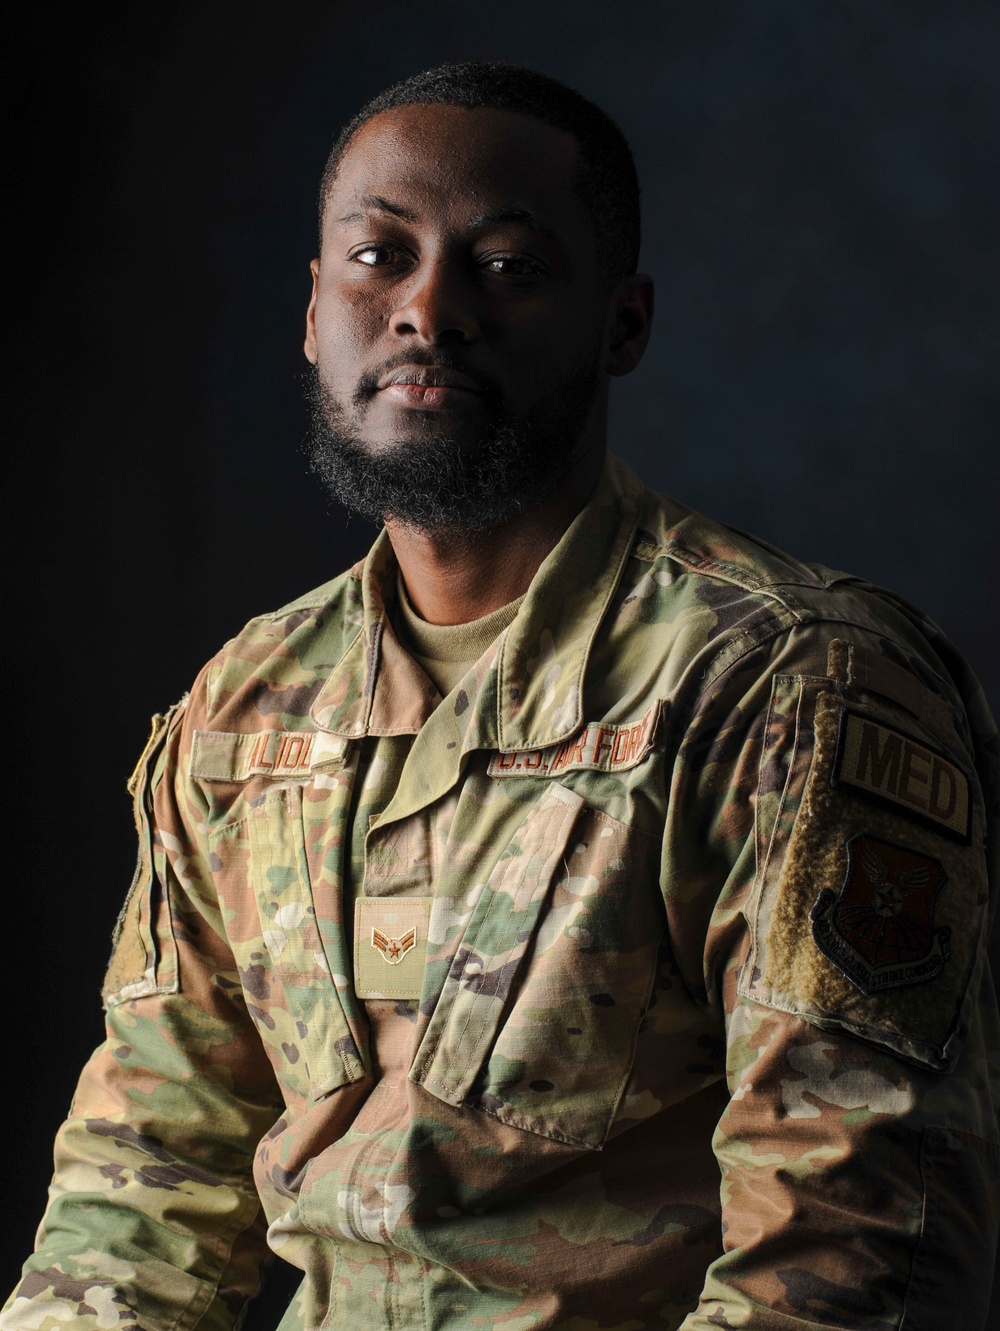 Senegalese Airman perseveres through barriers for a better life